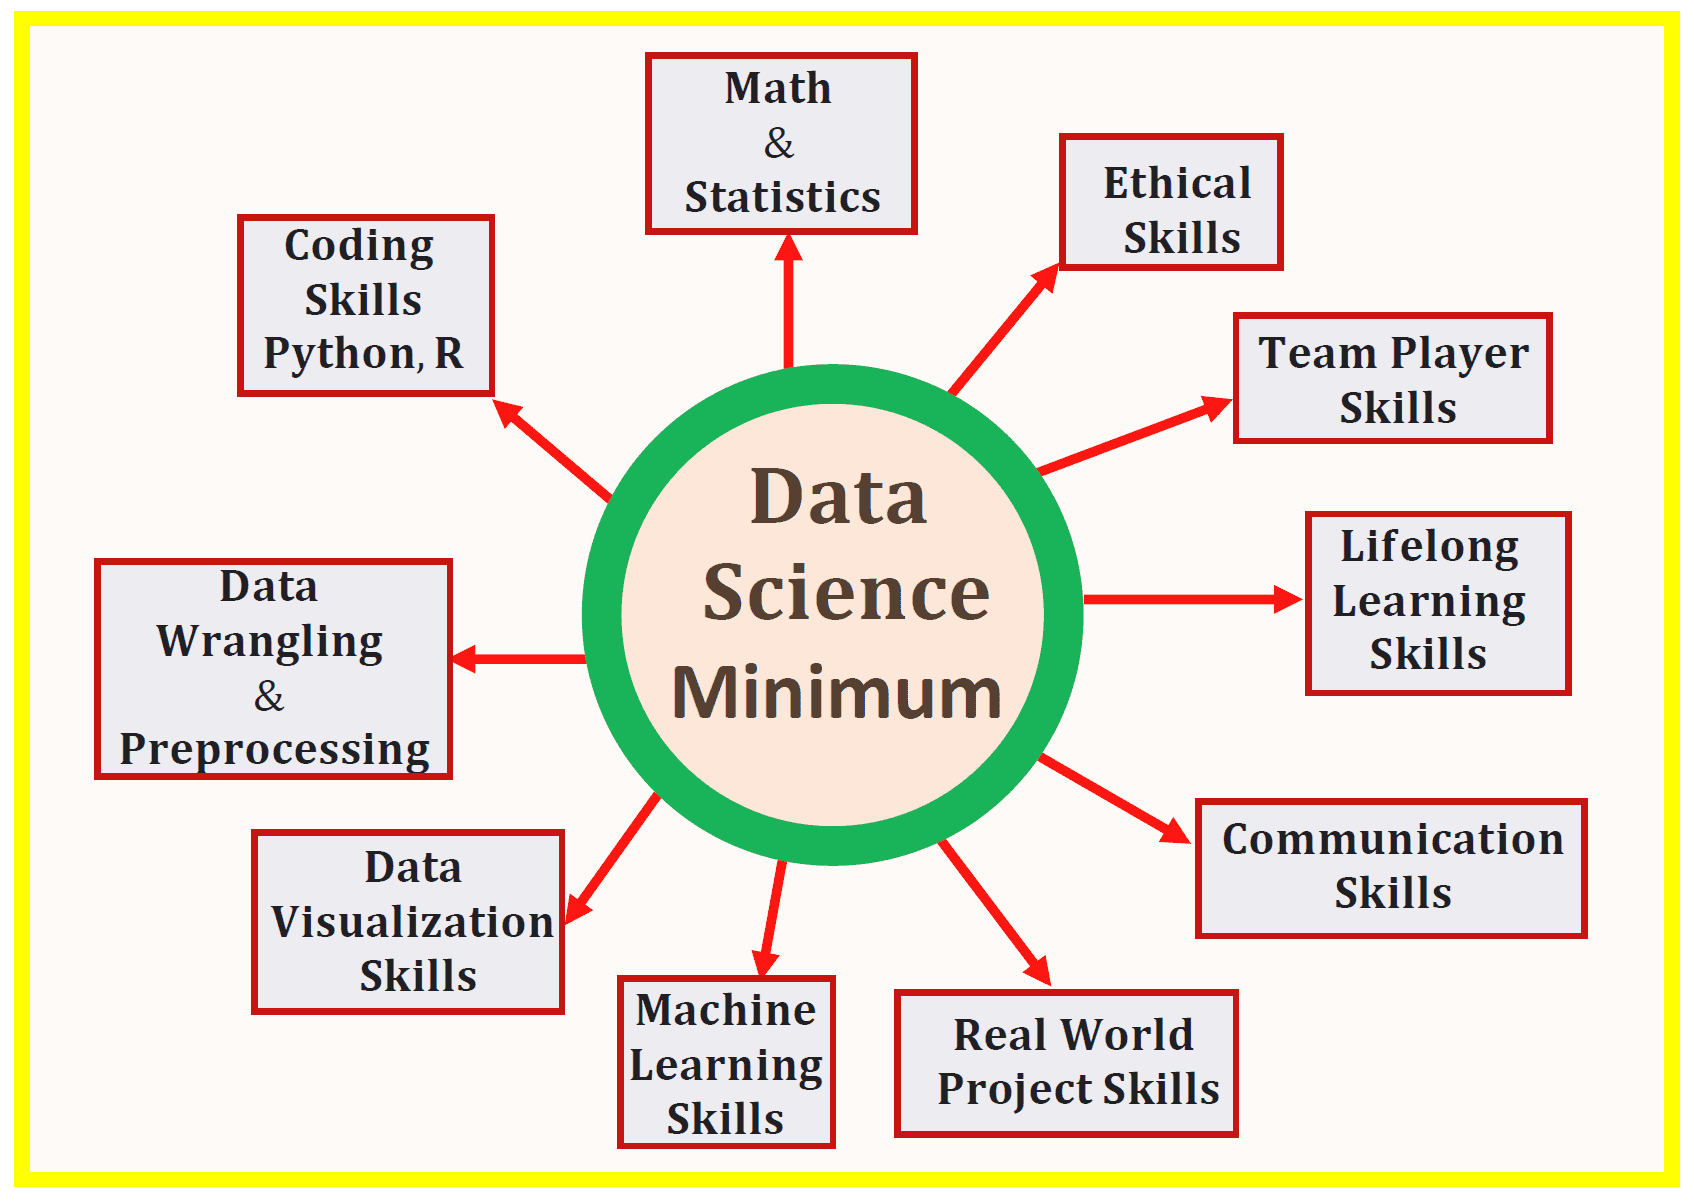 Data Science Minimum: 10 Essential Skills You Need to Know to Start Doing Data Science